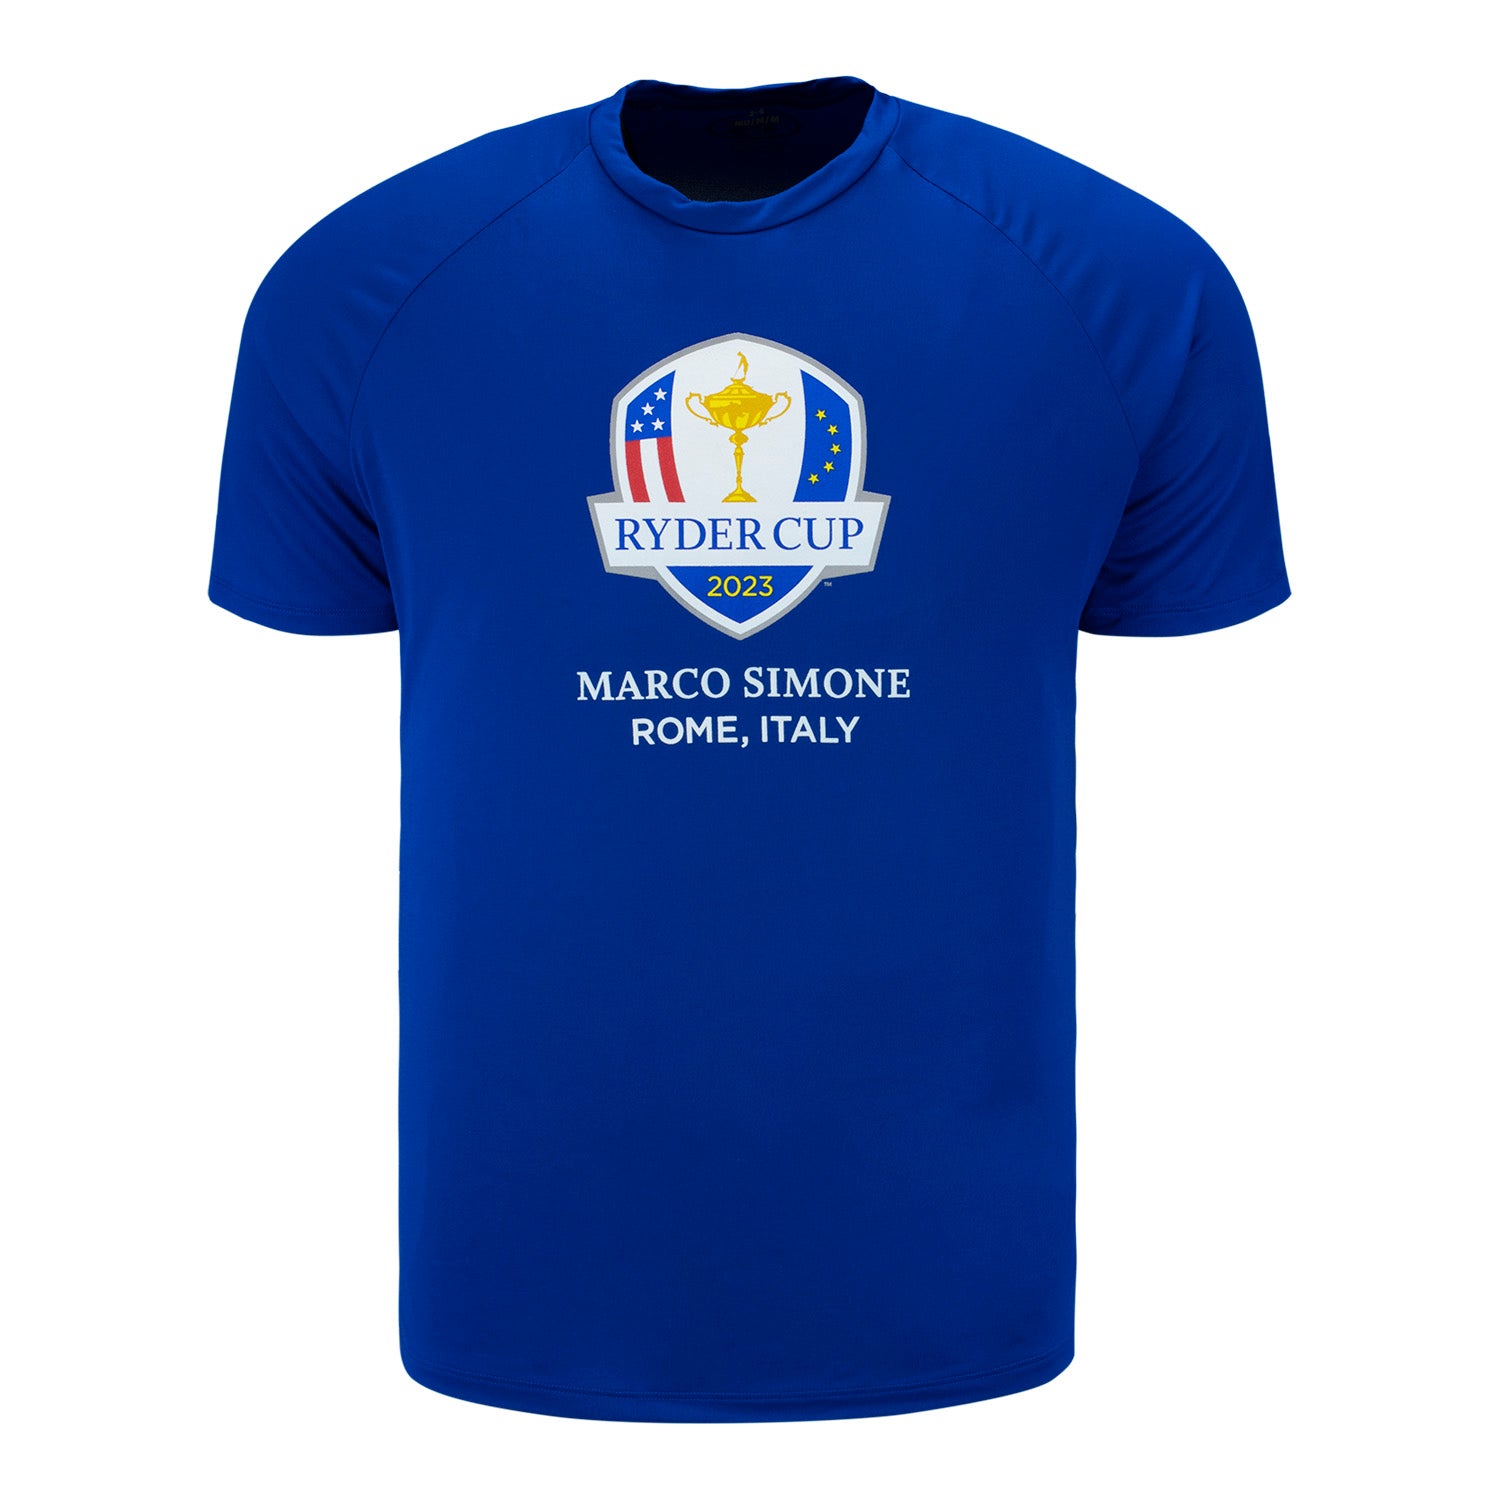 Under Armour 2023 Ryder Cup S19 Tech T-Shirt in Royal Blue- Front View